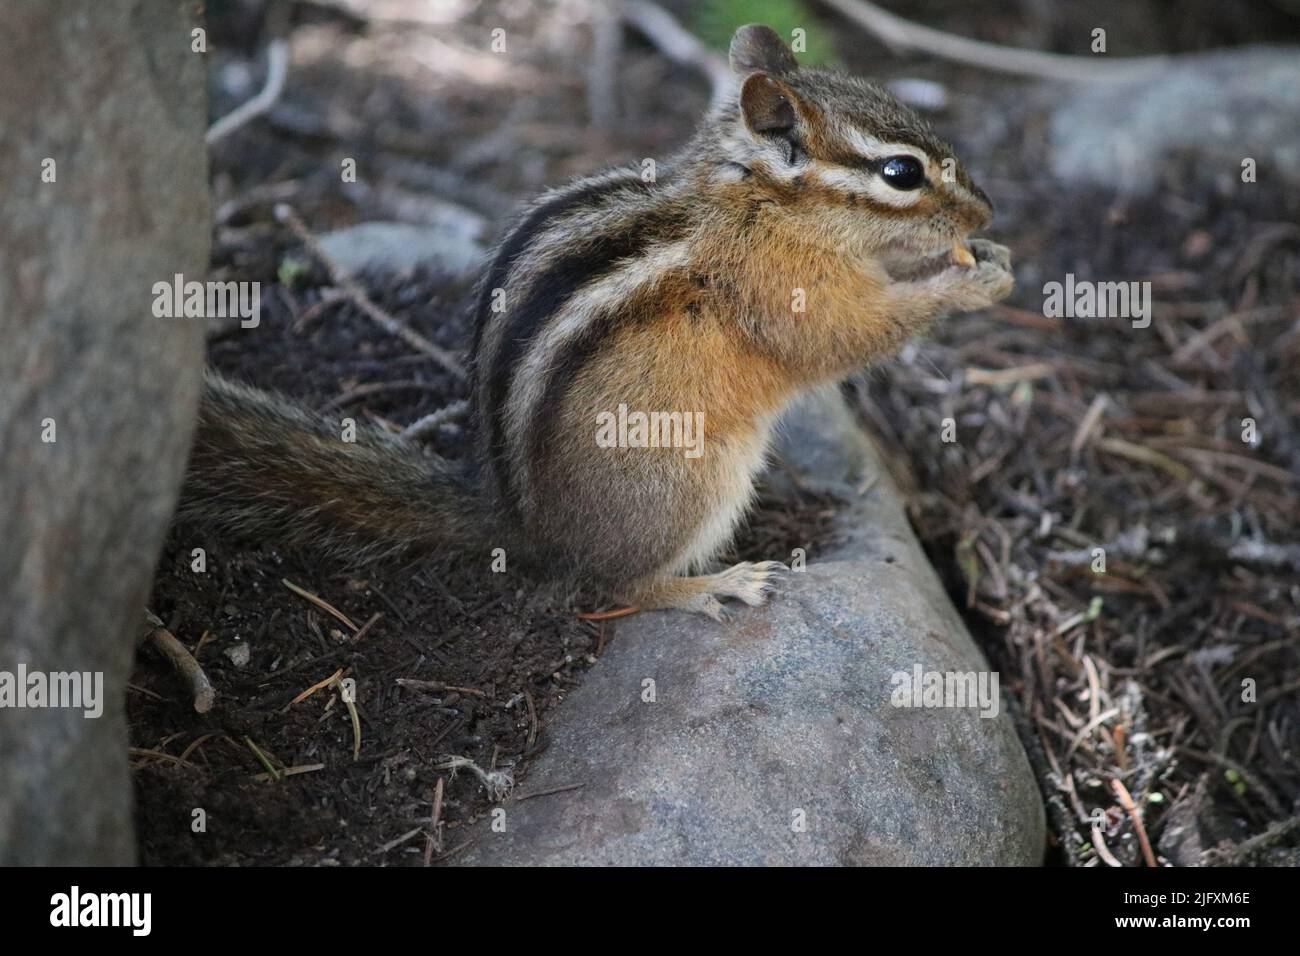 Black and white striped Least Chipmunk (Rodentia Sciuridae Tamias minimus), glassy black eyes, snacking by Baring Falls, Glacier National Park, MT, US Stock Photo